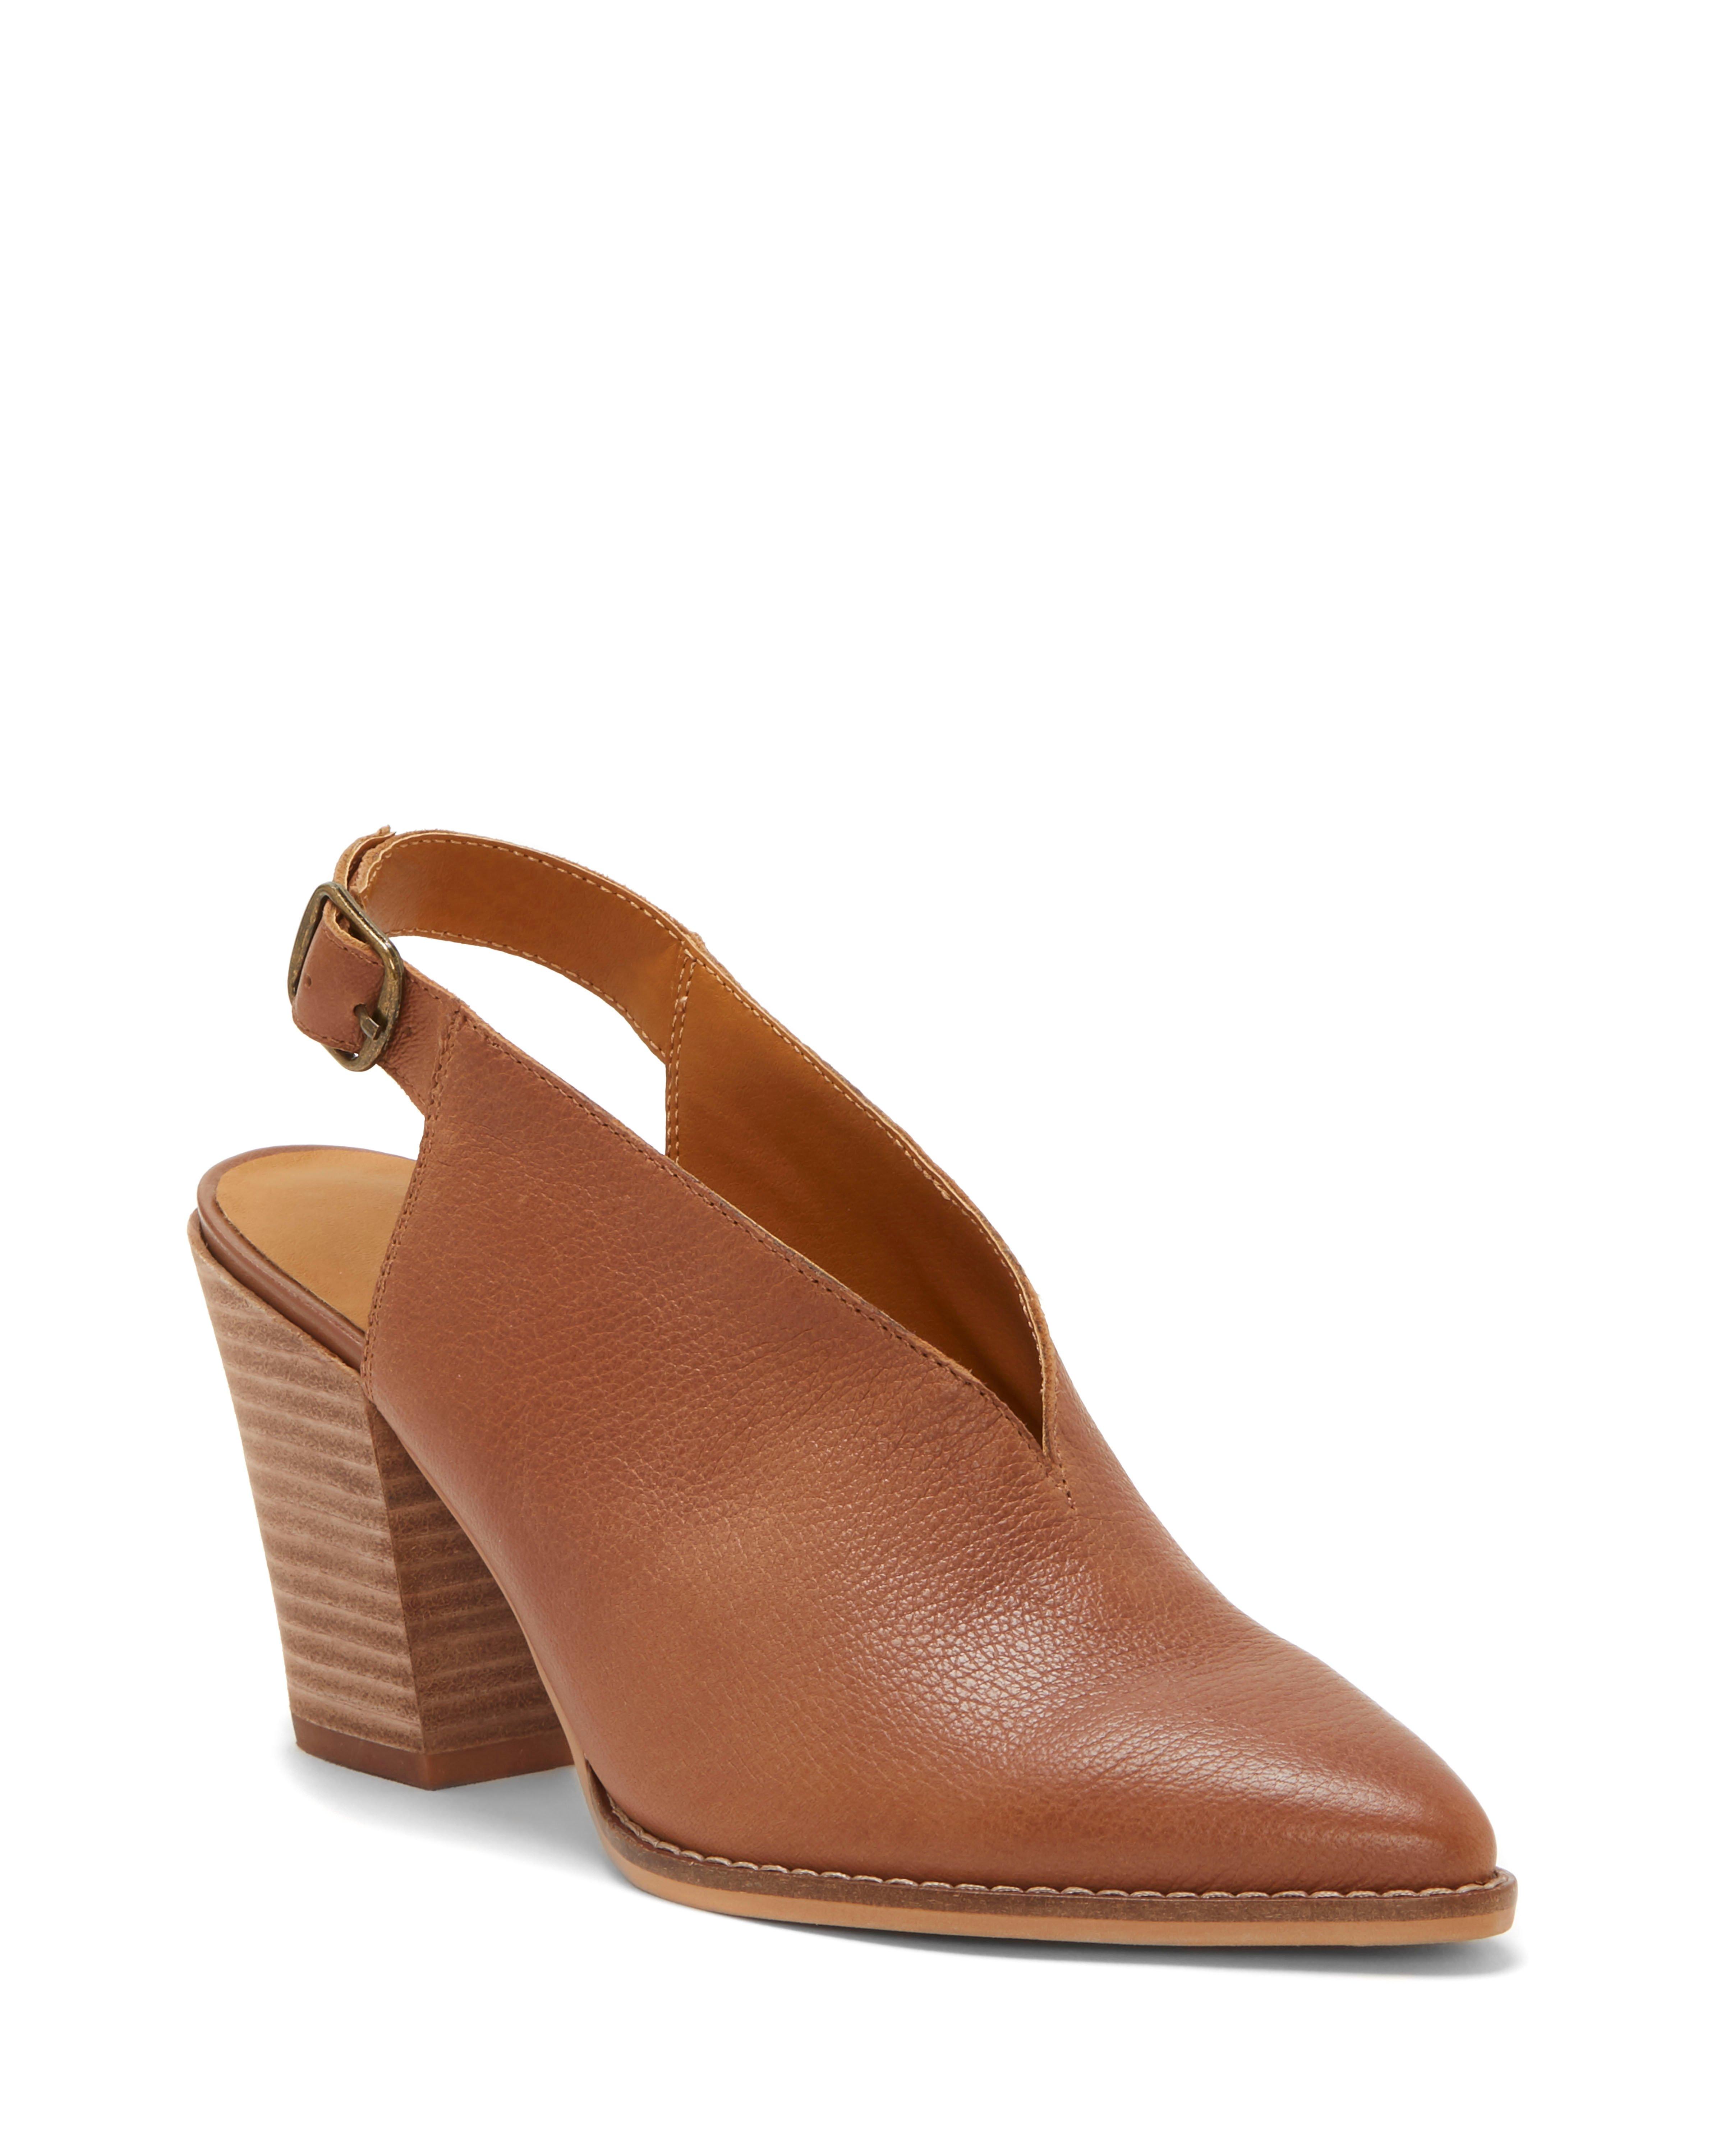 lucky brand wedge shoes